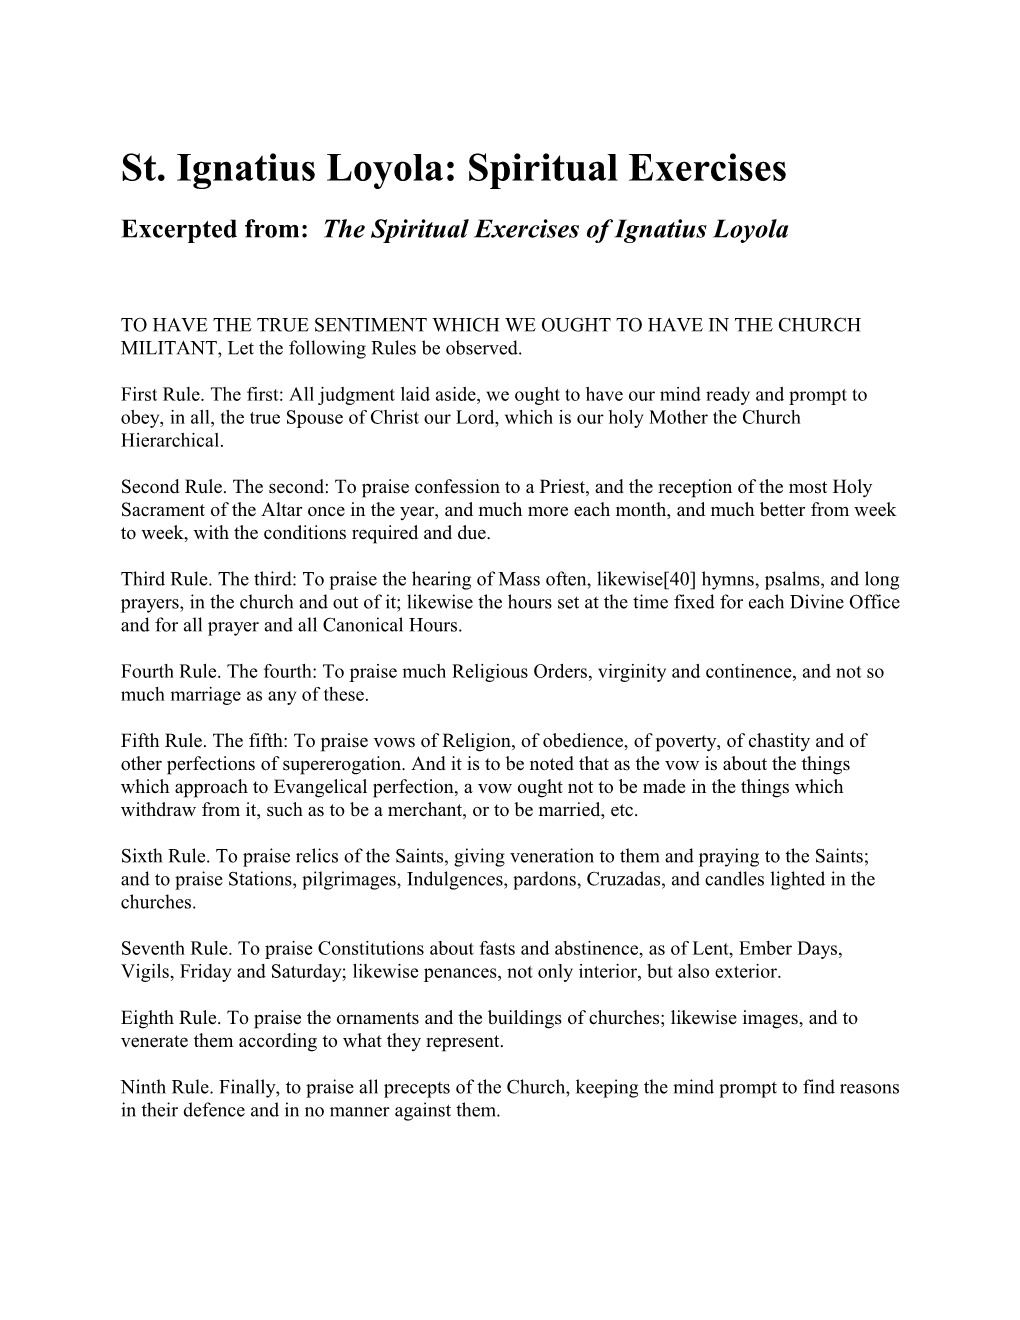 Excerpted From: the Spiritual Exercises of Ignatius Loyola